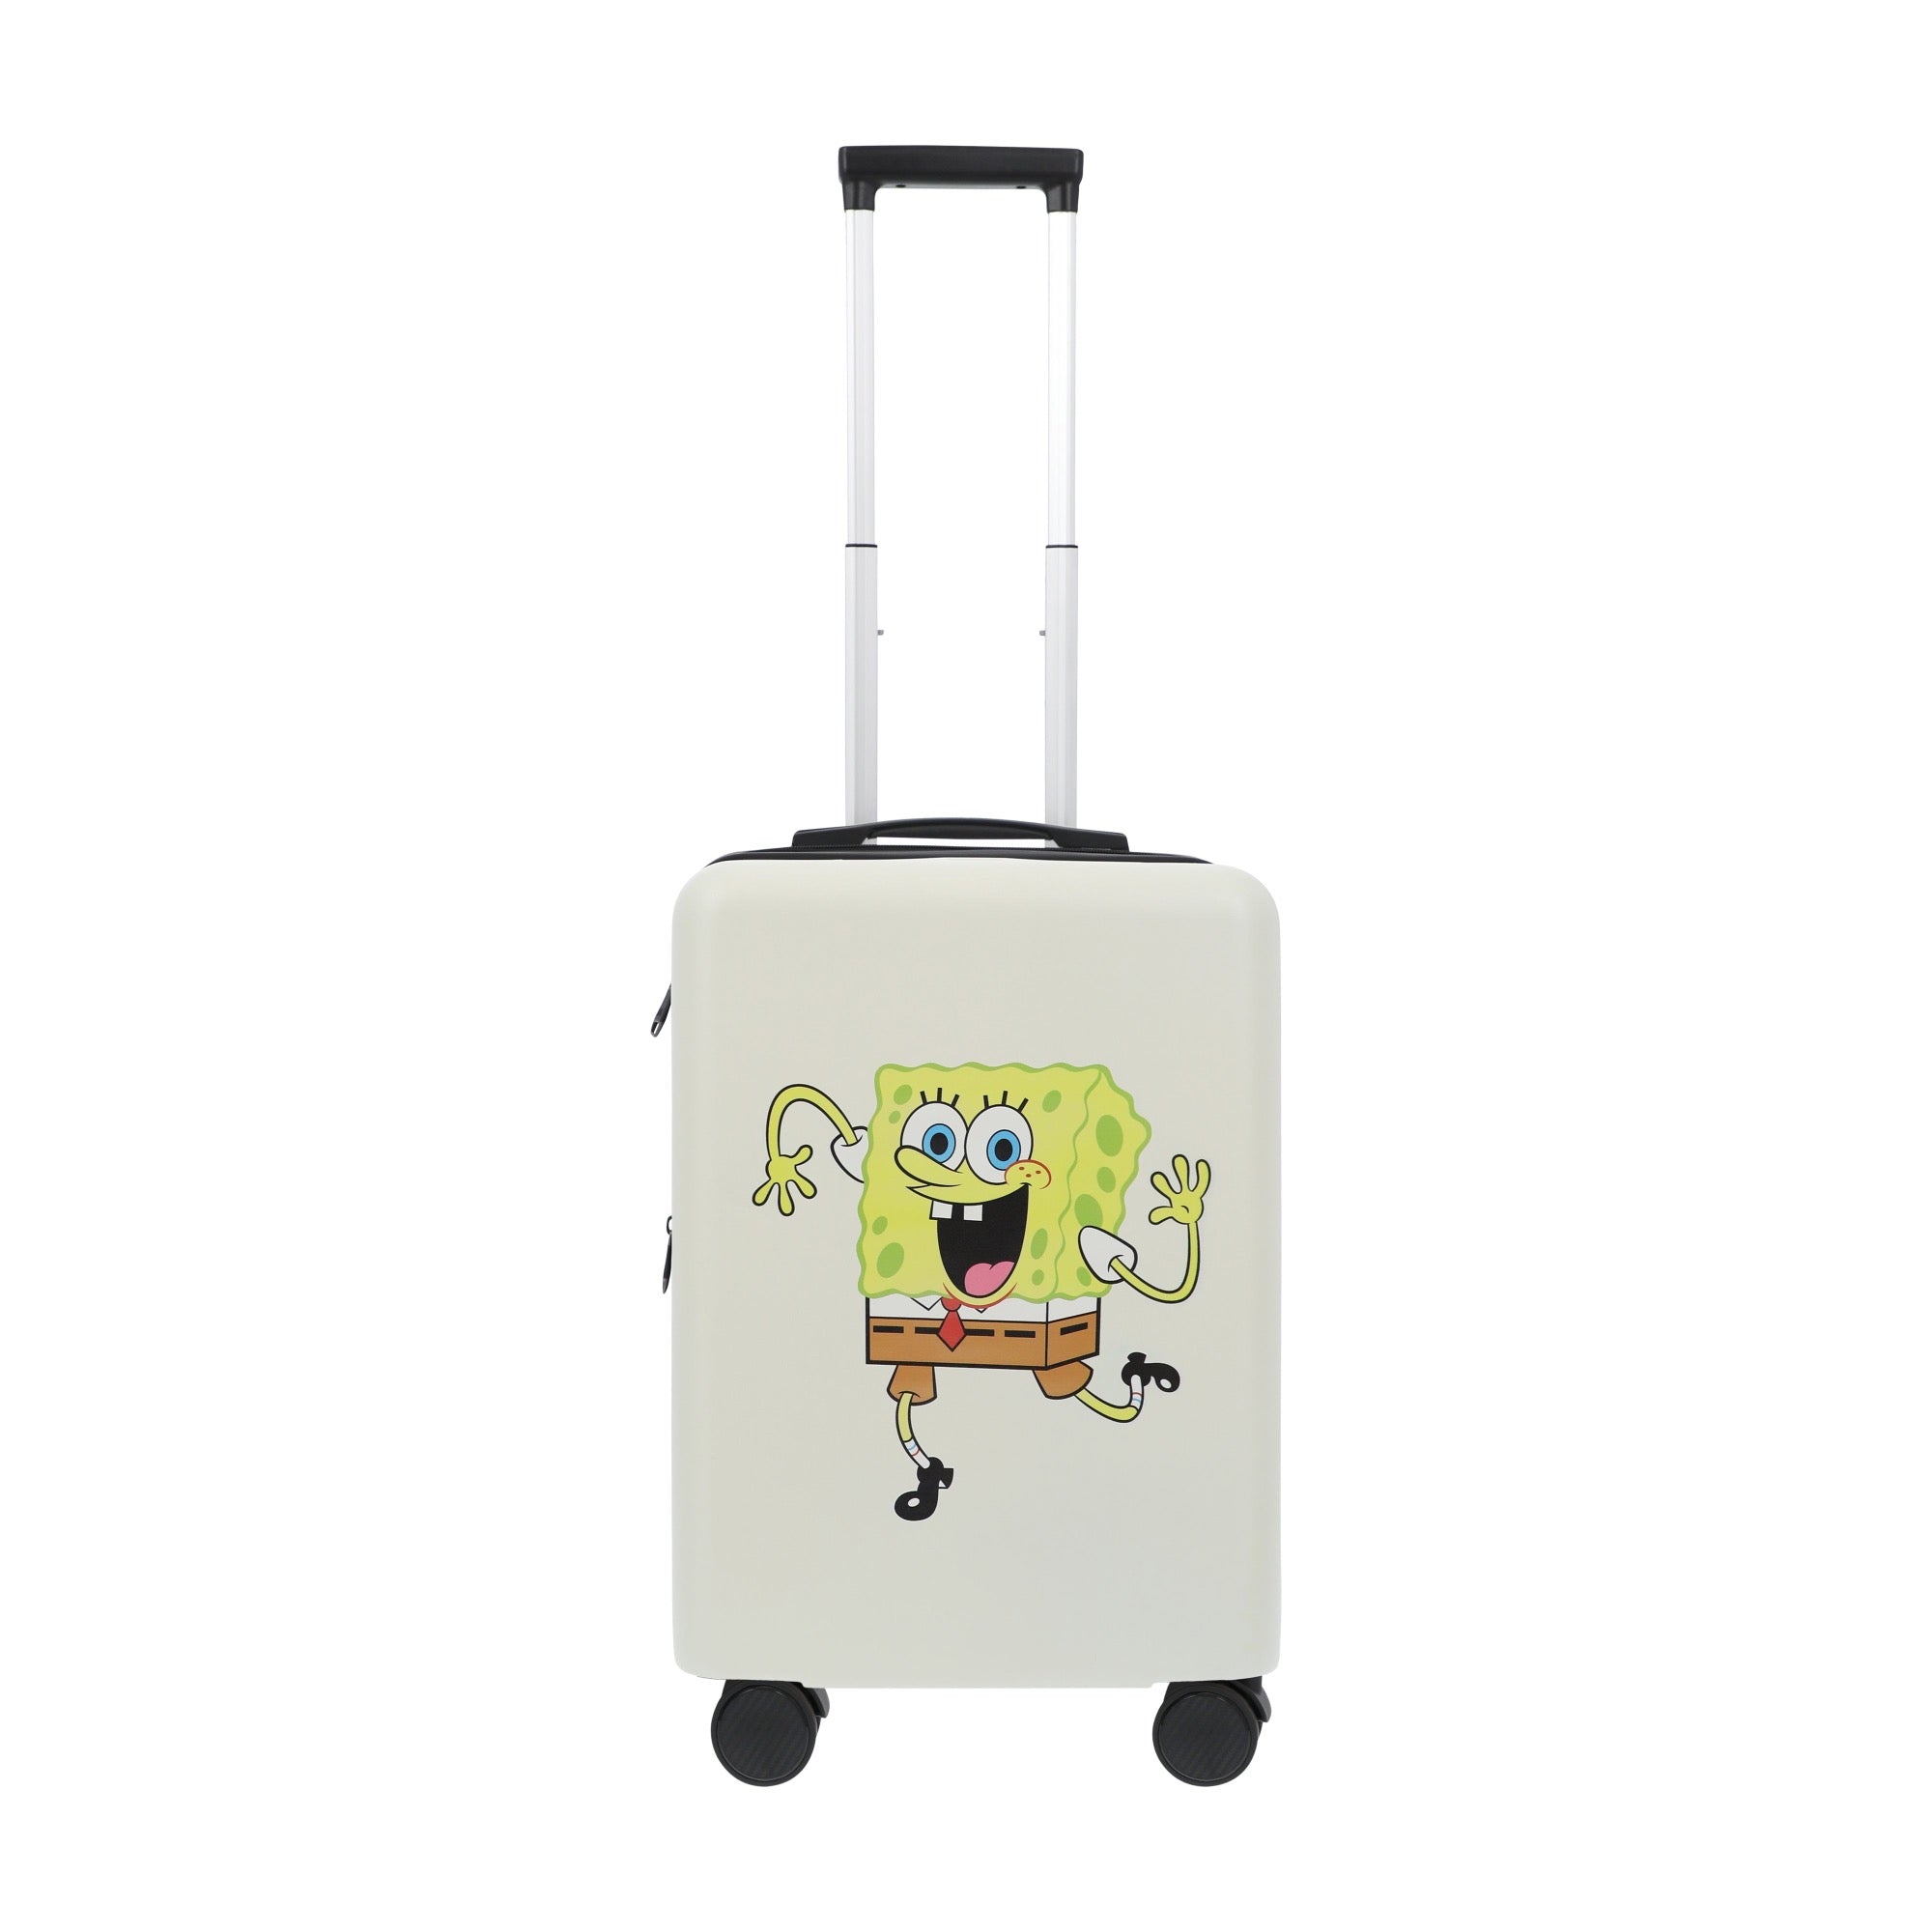 White nickelodeon spongeBob 22.5" carry-on spinner suitcase luggage by Ful